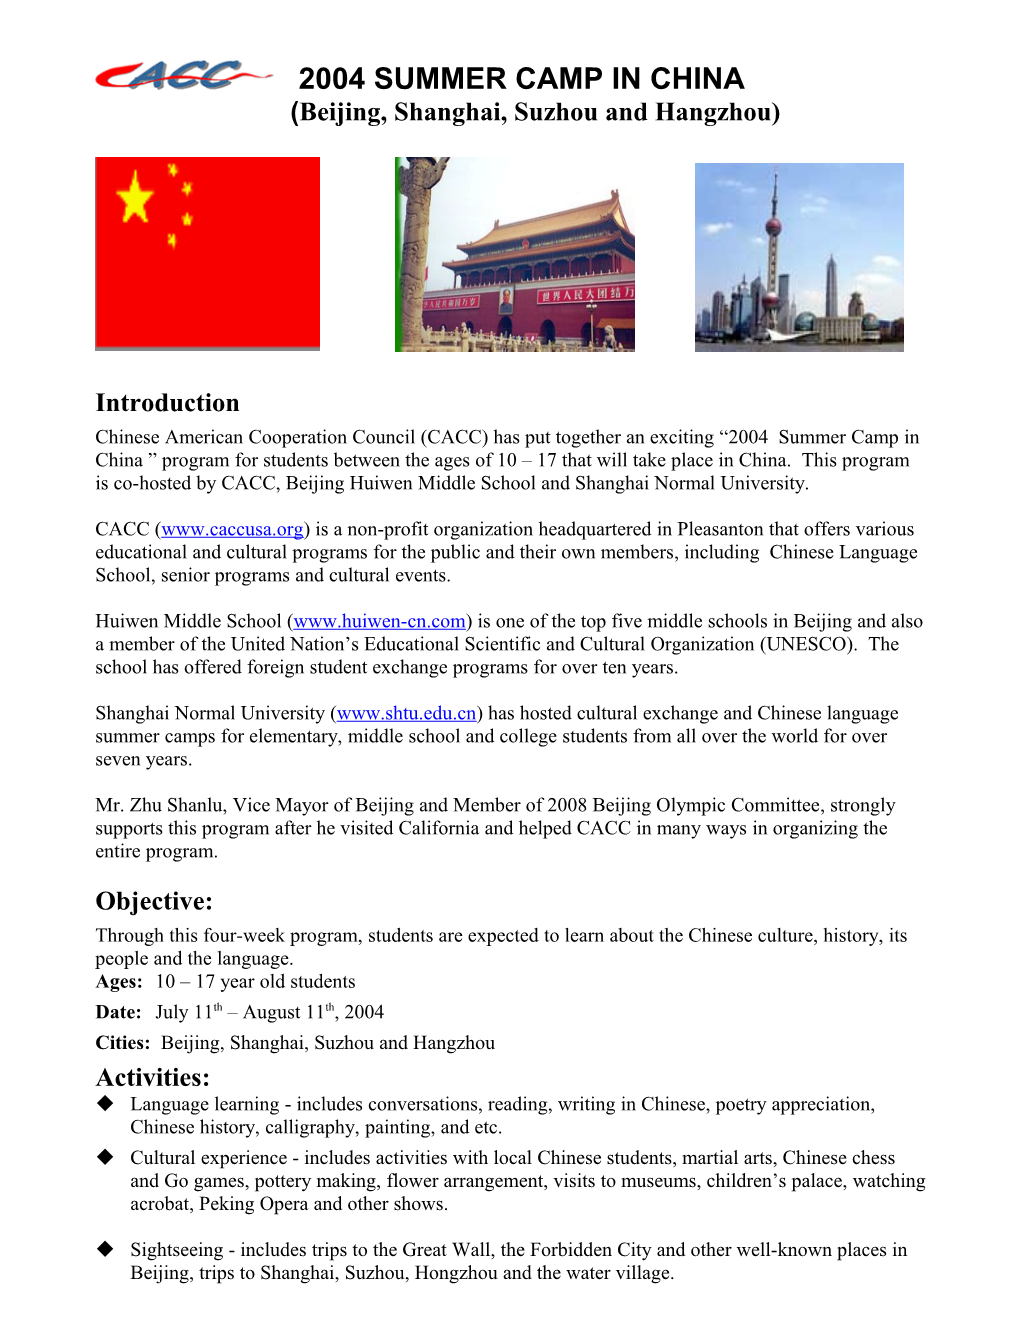 CACC (Chinese American Cooperation Council) Has Put Together Exciting China Summer Camp